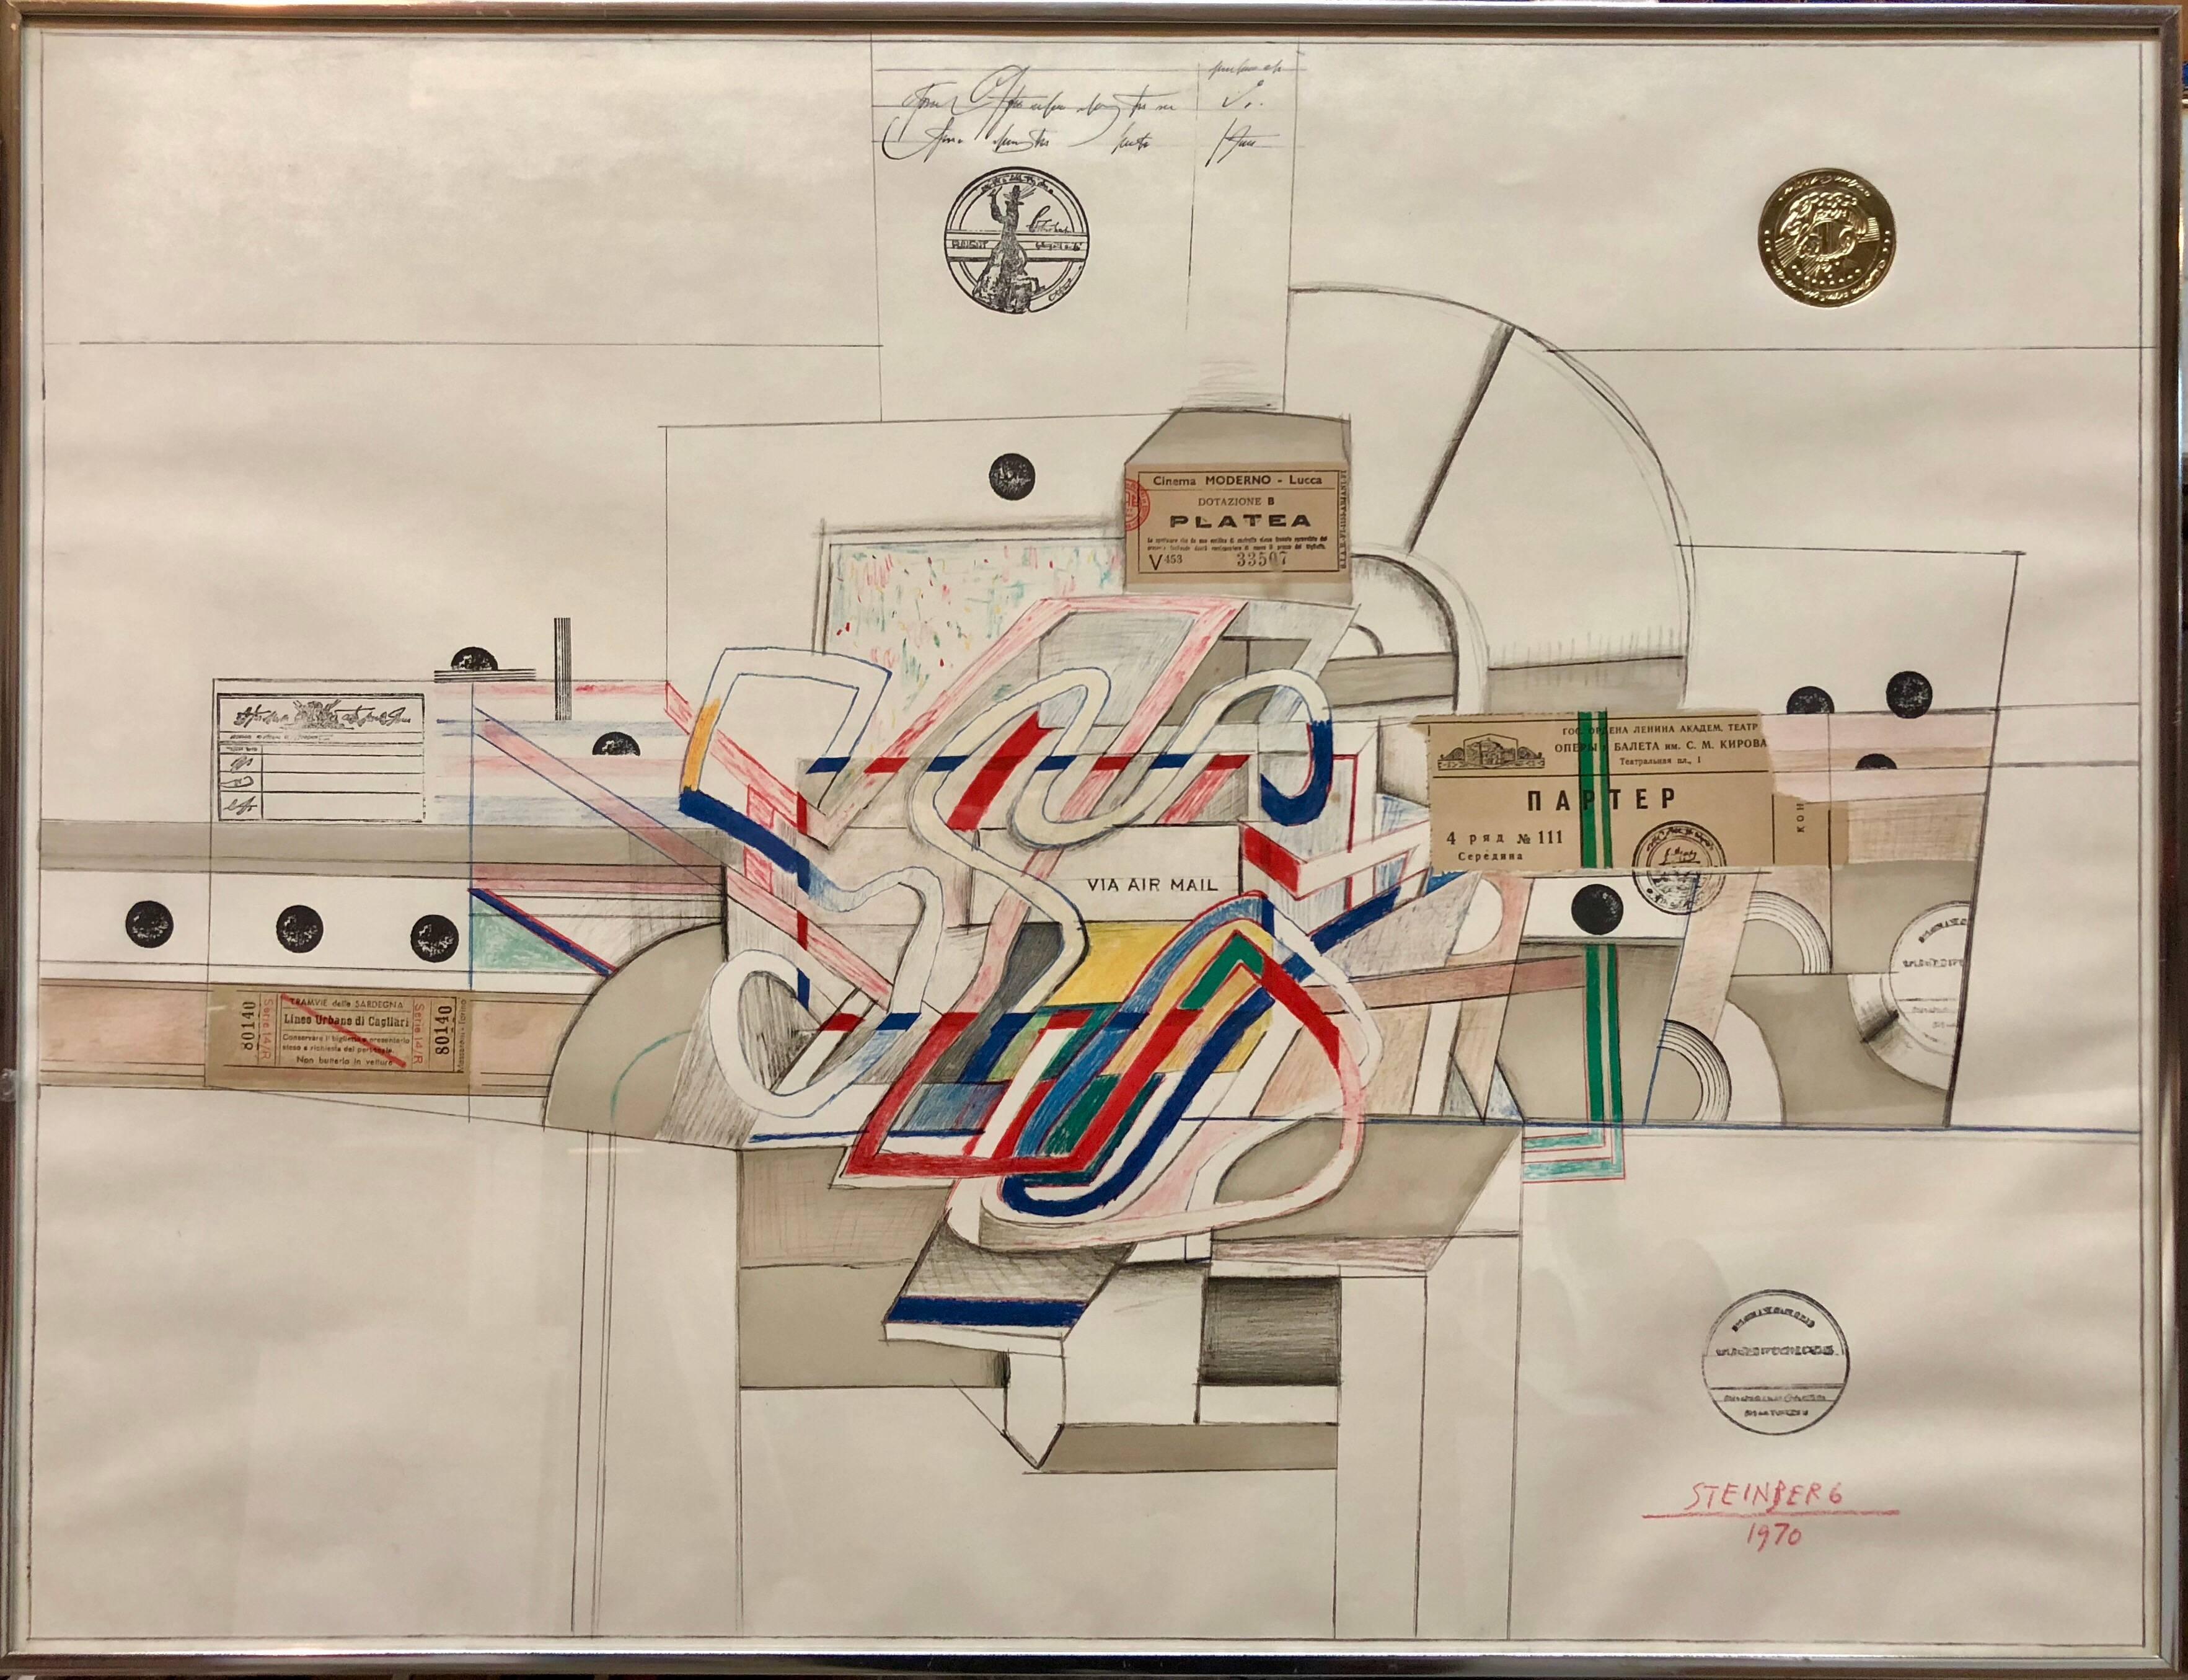 Lithograph with Gold Foil Seal Via Air Mail New Yorker Cartoonist - Print by Saul Steinberg